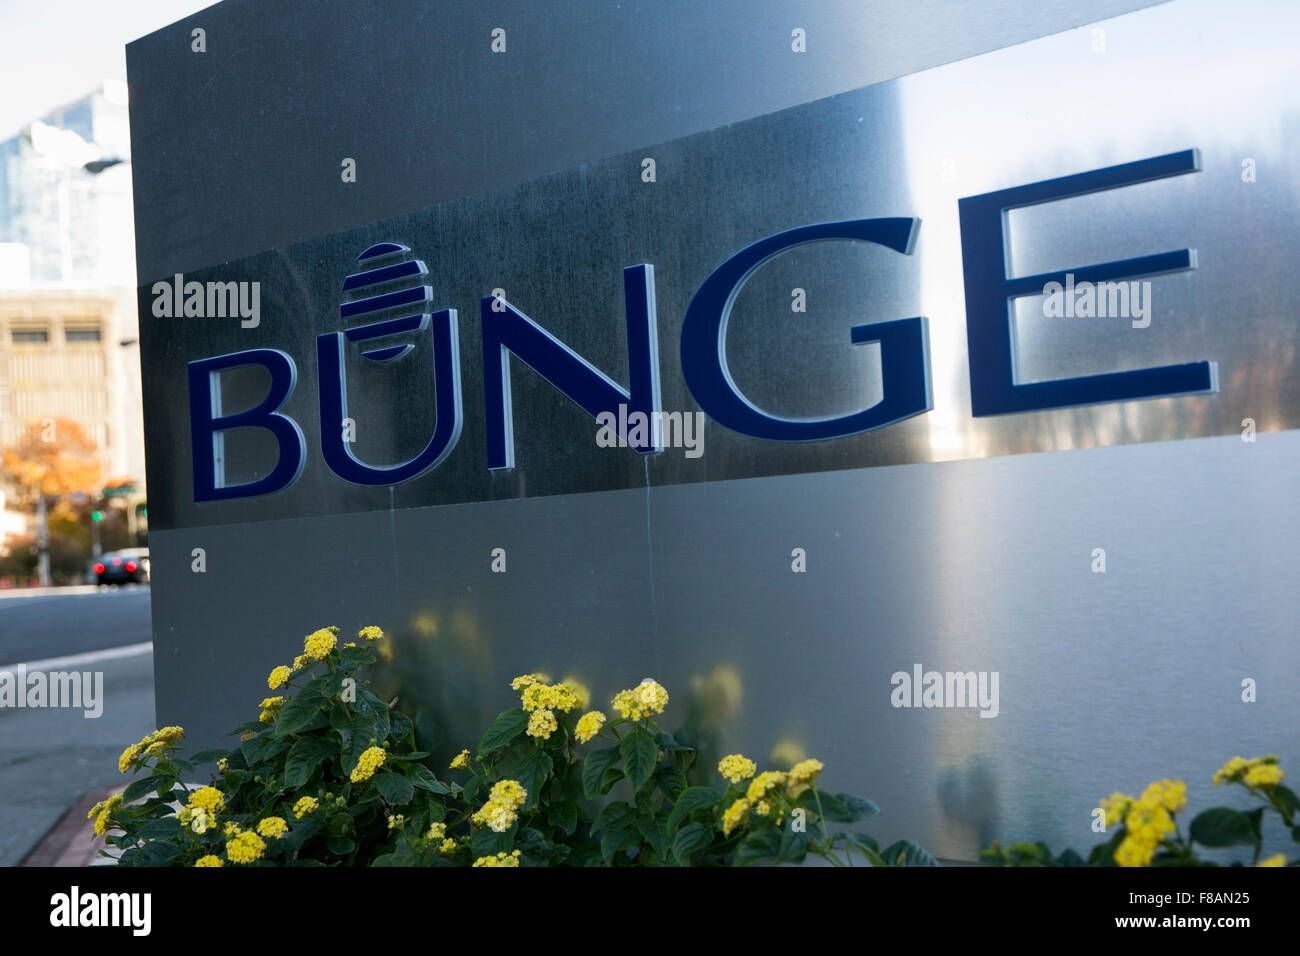 A logo sign outside of the headquarters of Bunge Limited in White Plains, New York on November 21, 2015. Stock Photo